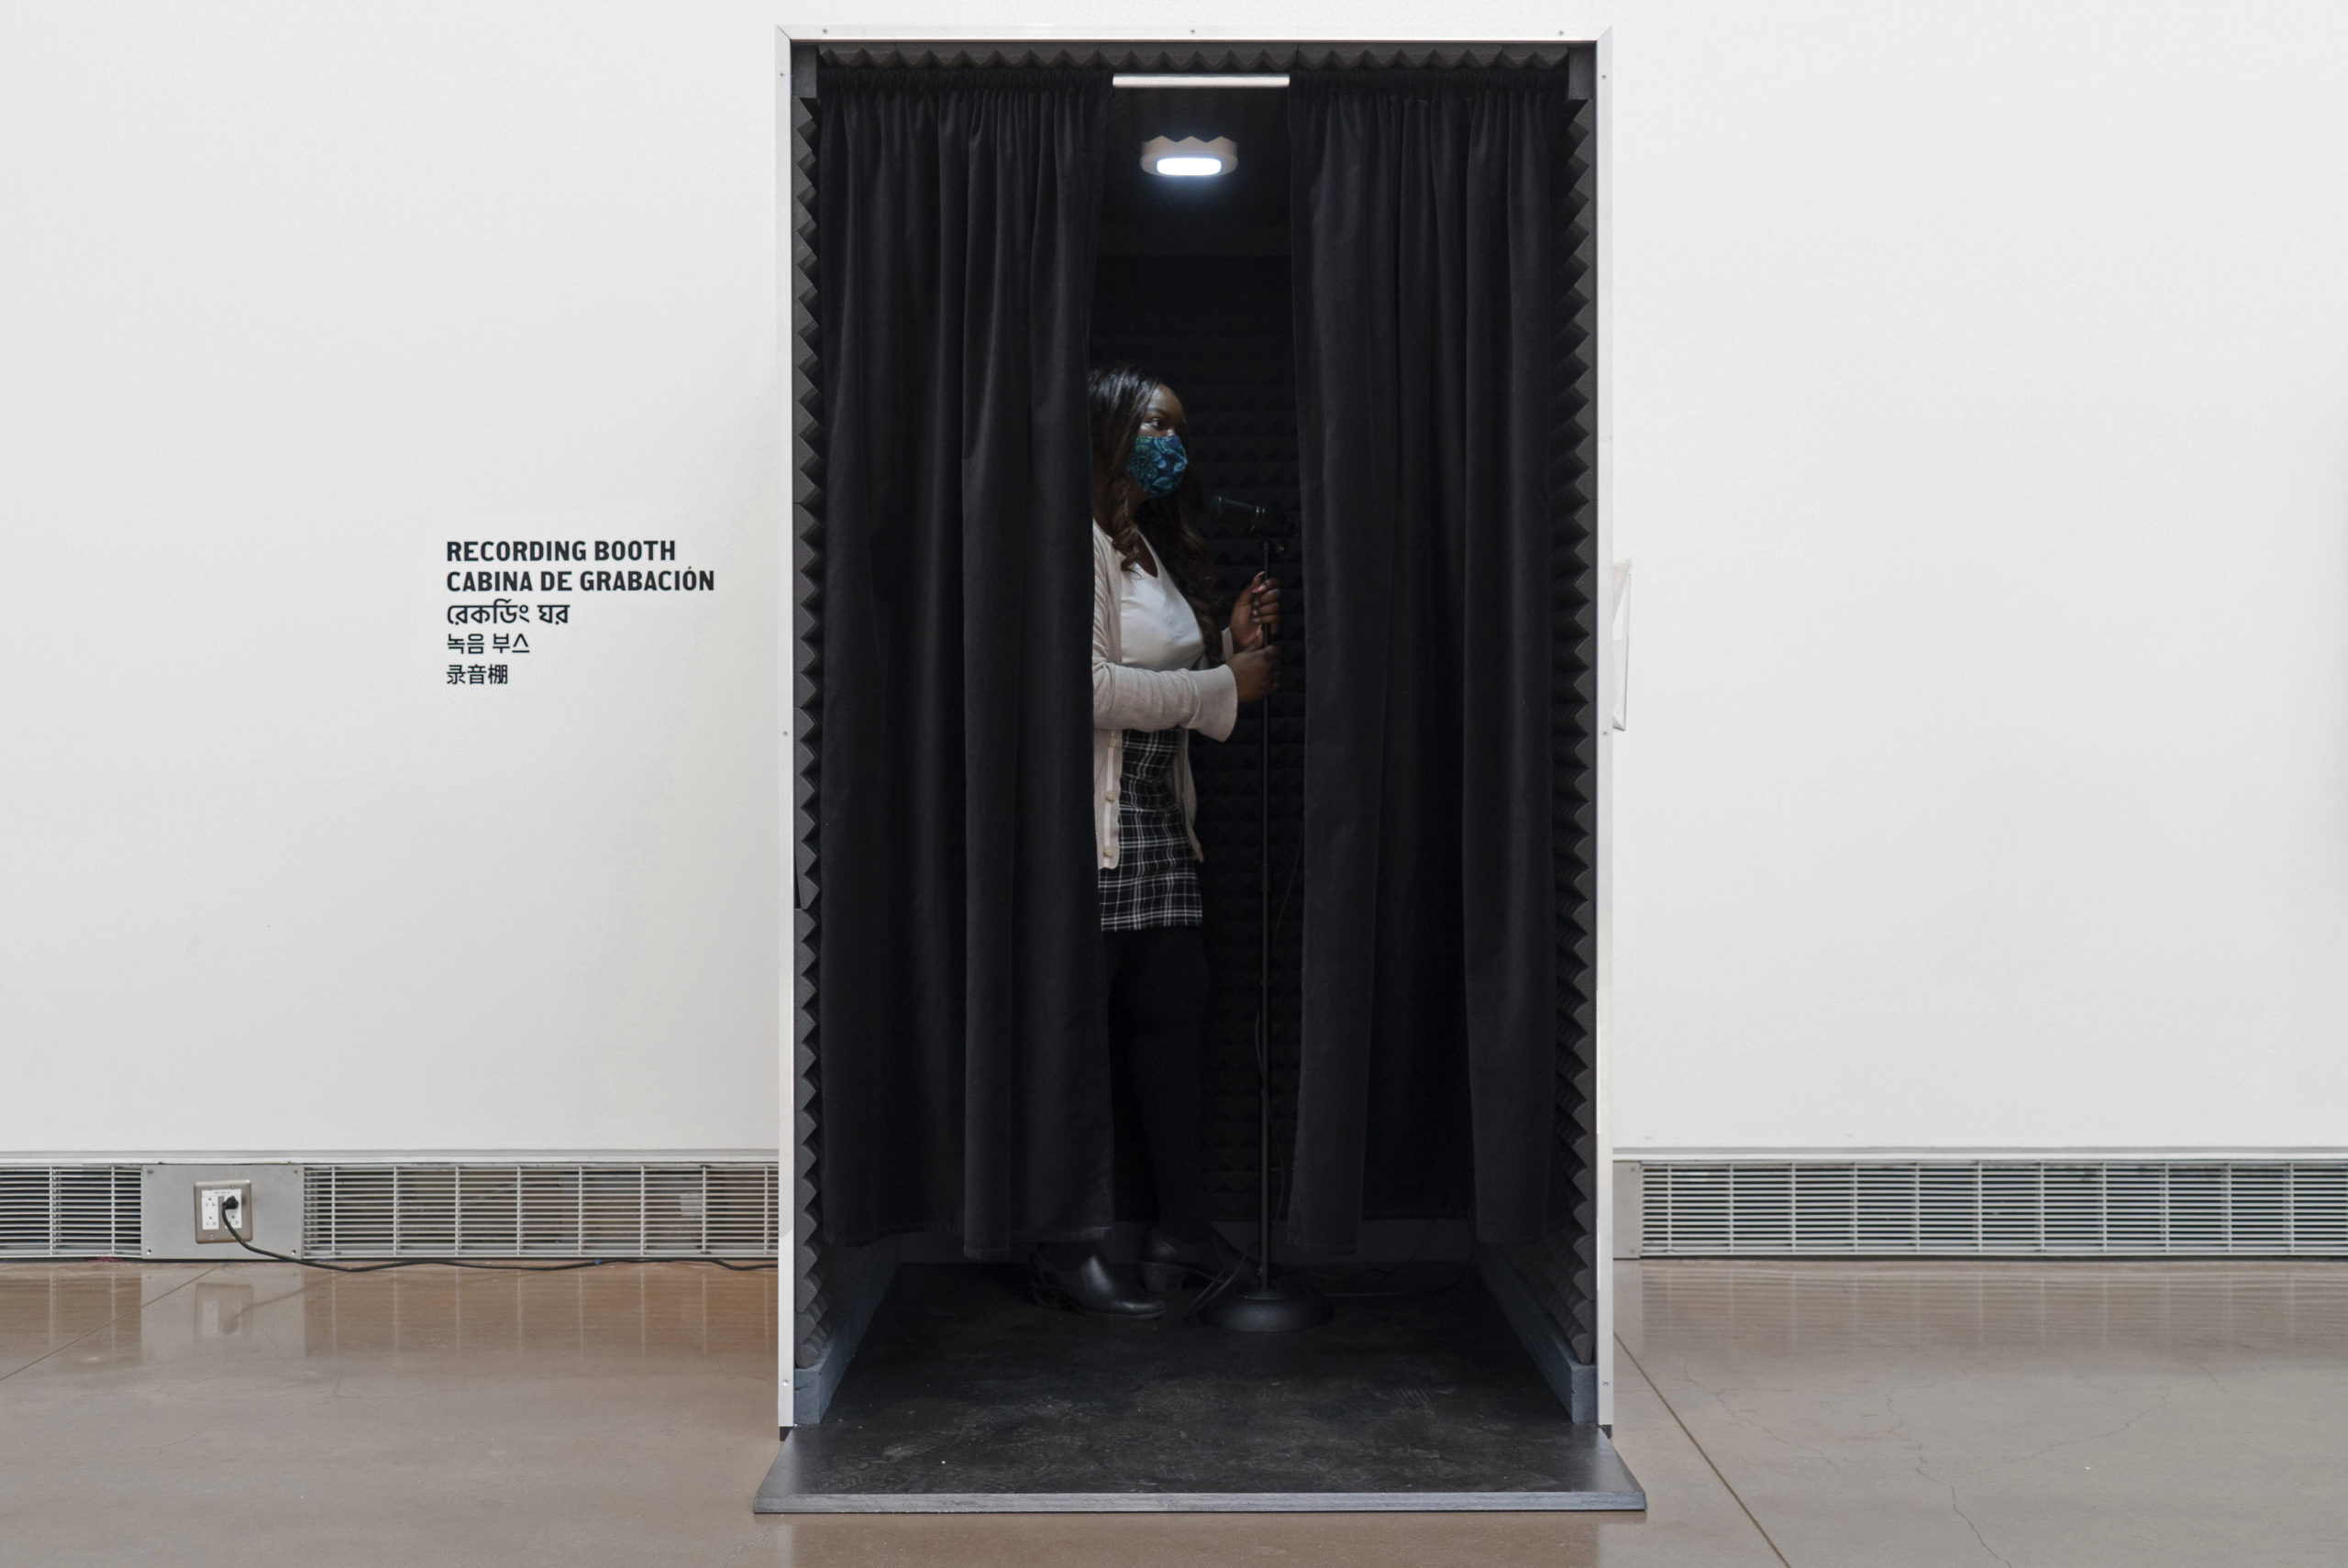 In the center, a visitor is standing in a wooden rectangular recording booth with a black curtain split open. On the wall, to the left of the recording booth reads Recording Booth.